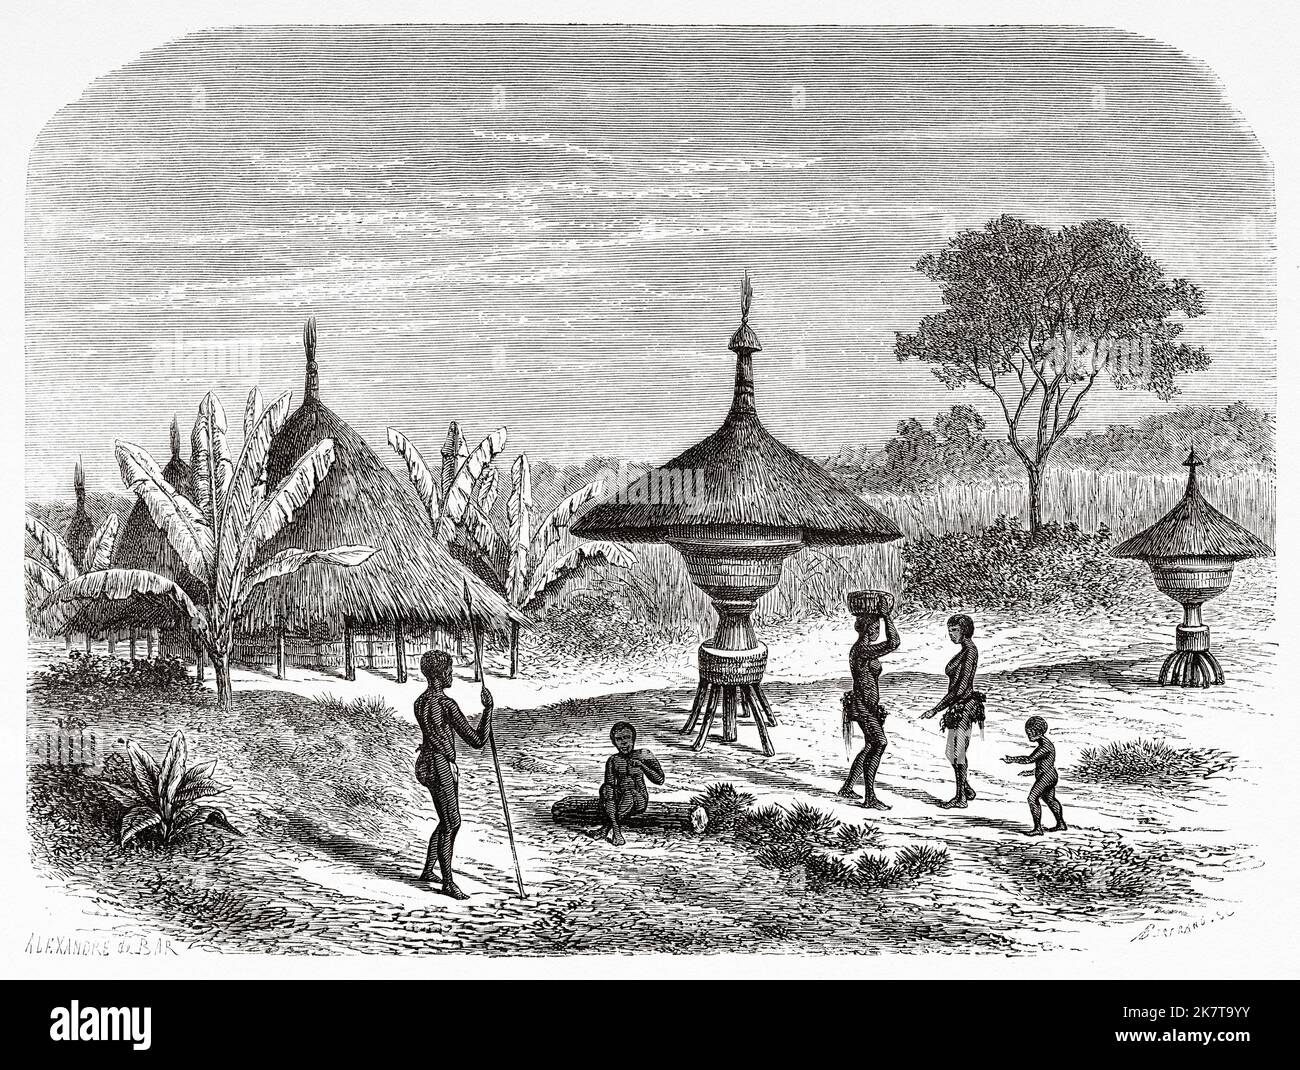 Granaries in a Golo people village, Democratic Republic of the Congo. Africa. Heart of Africa Three years travels and adventures in the unexplored regions of Central Africa by Georg August Schweinfurth, 1868-1871 Stock Photo